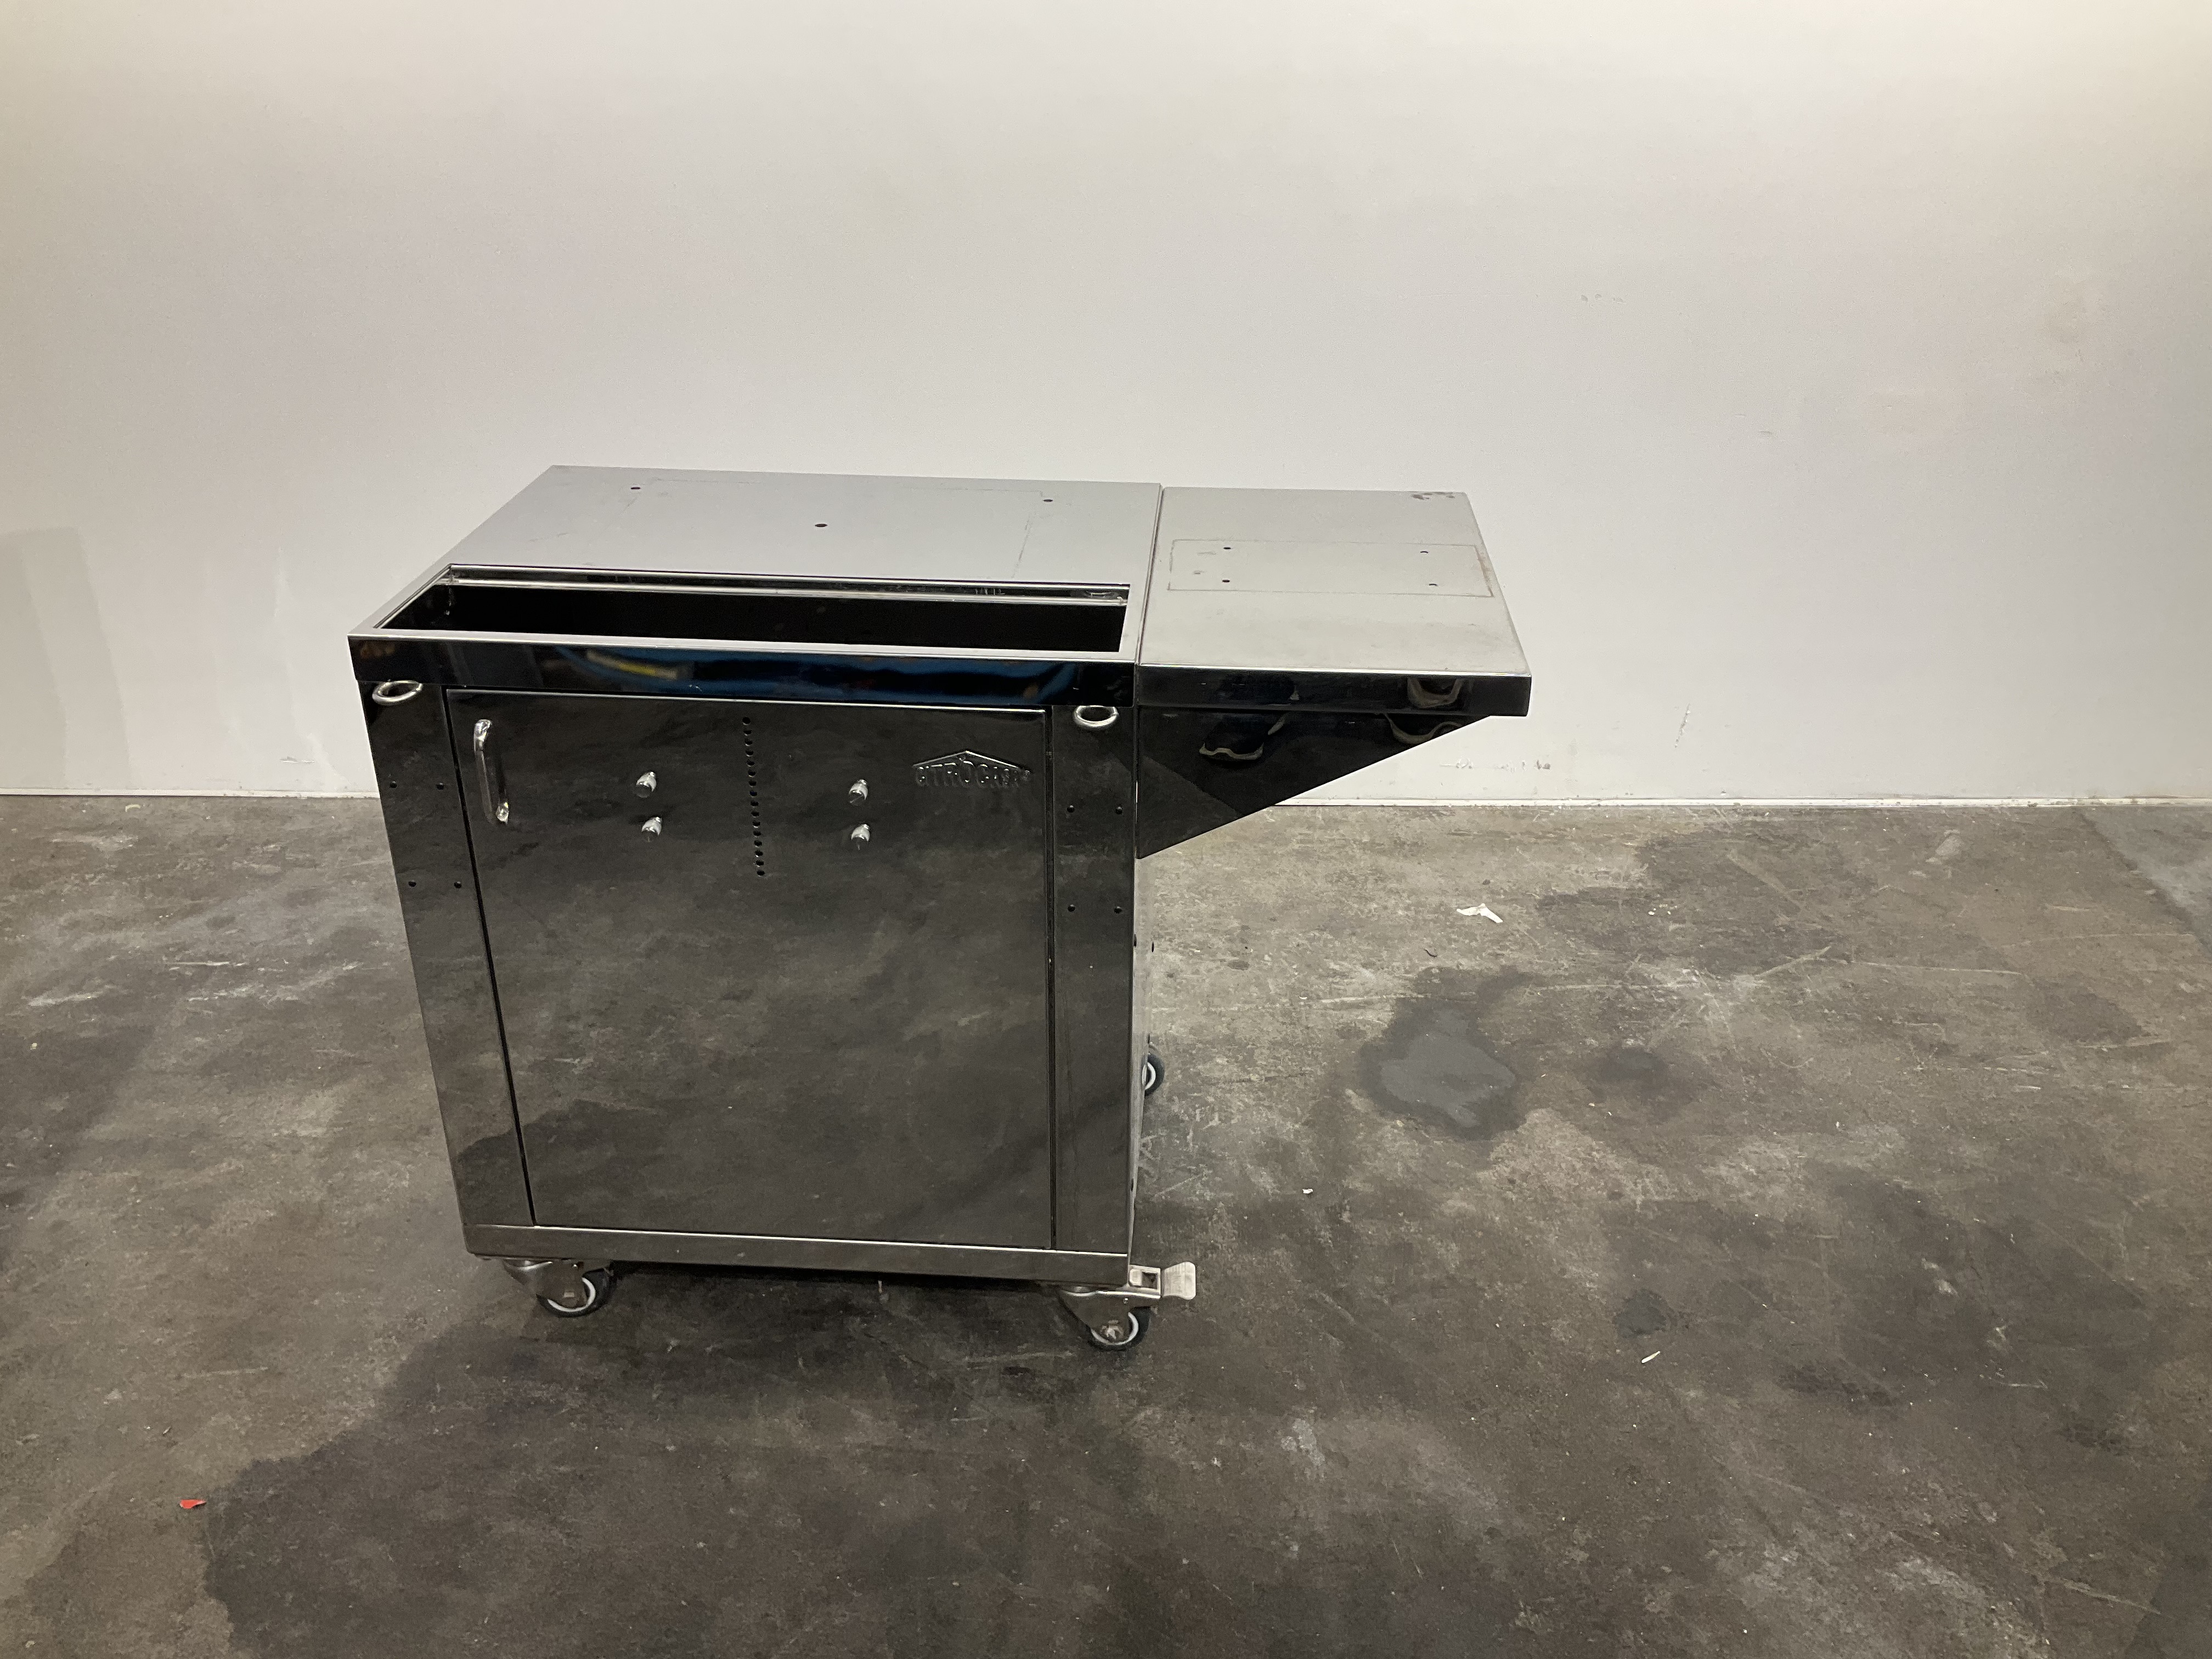 Stainless steel table / stainless steel cabinet on castors, used